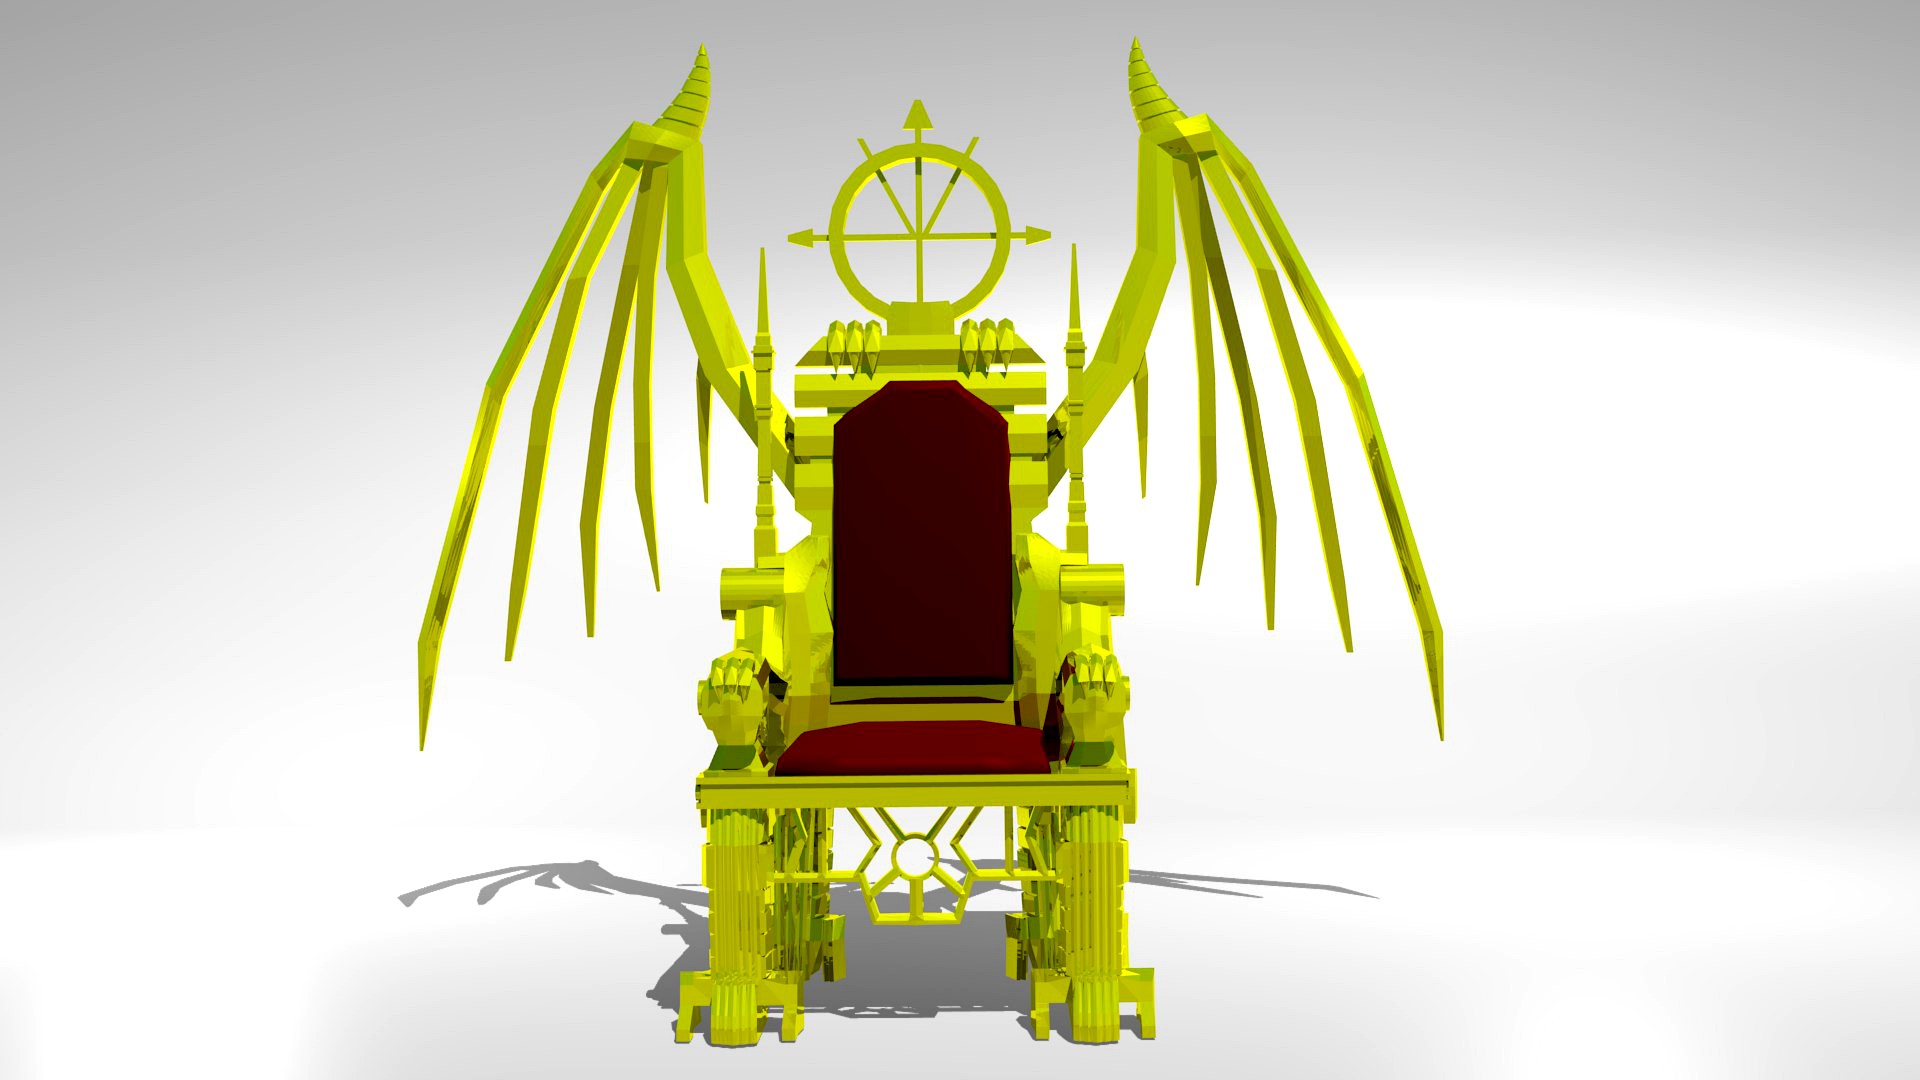 The King Throne